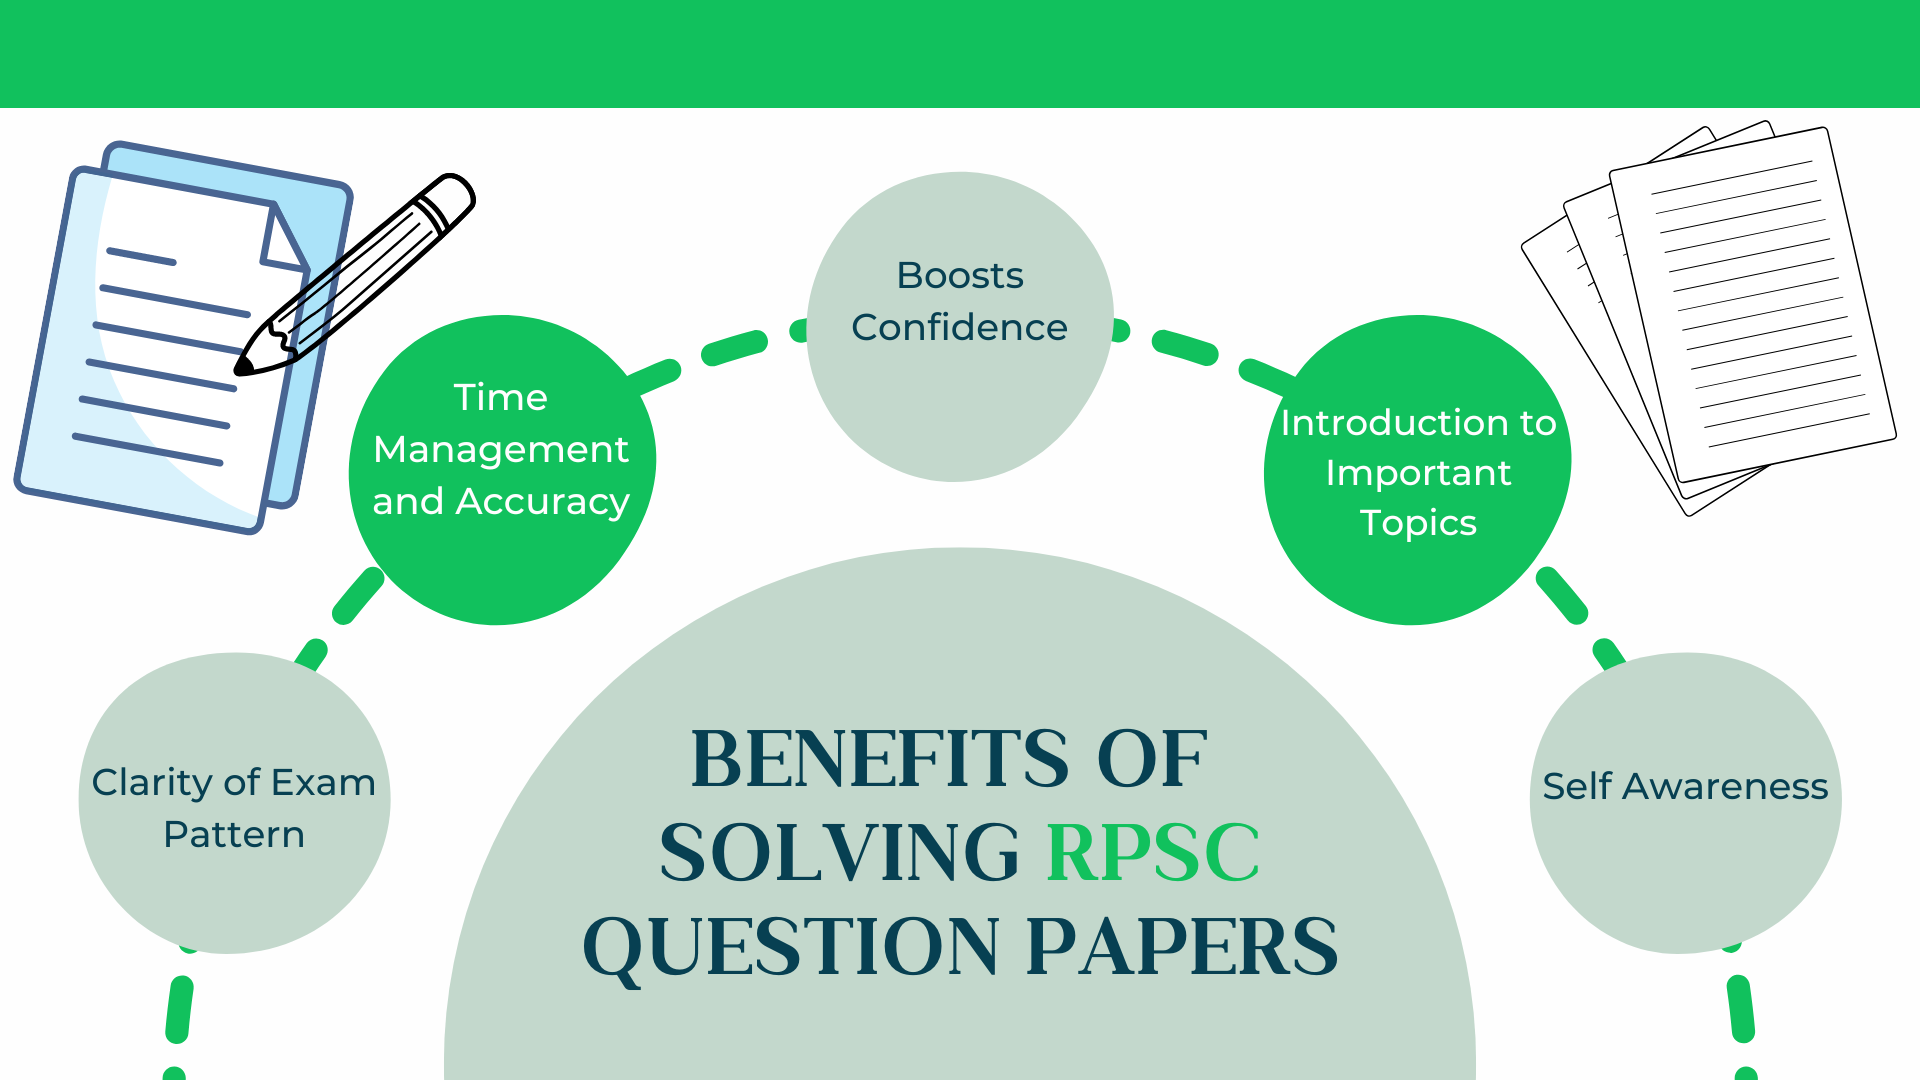 RPSC Question Papers